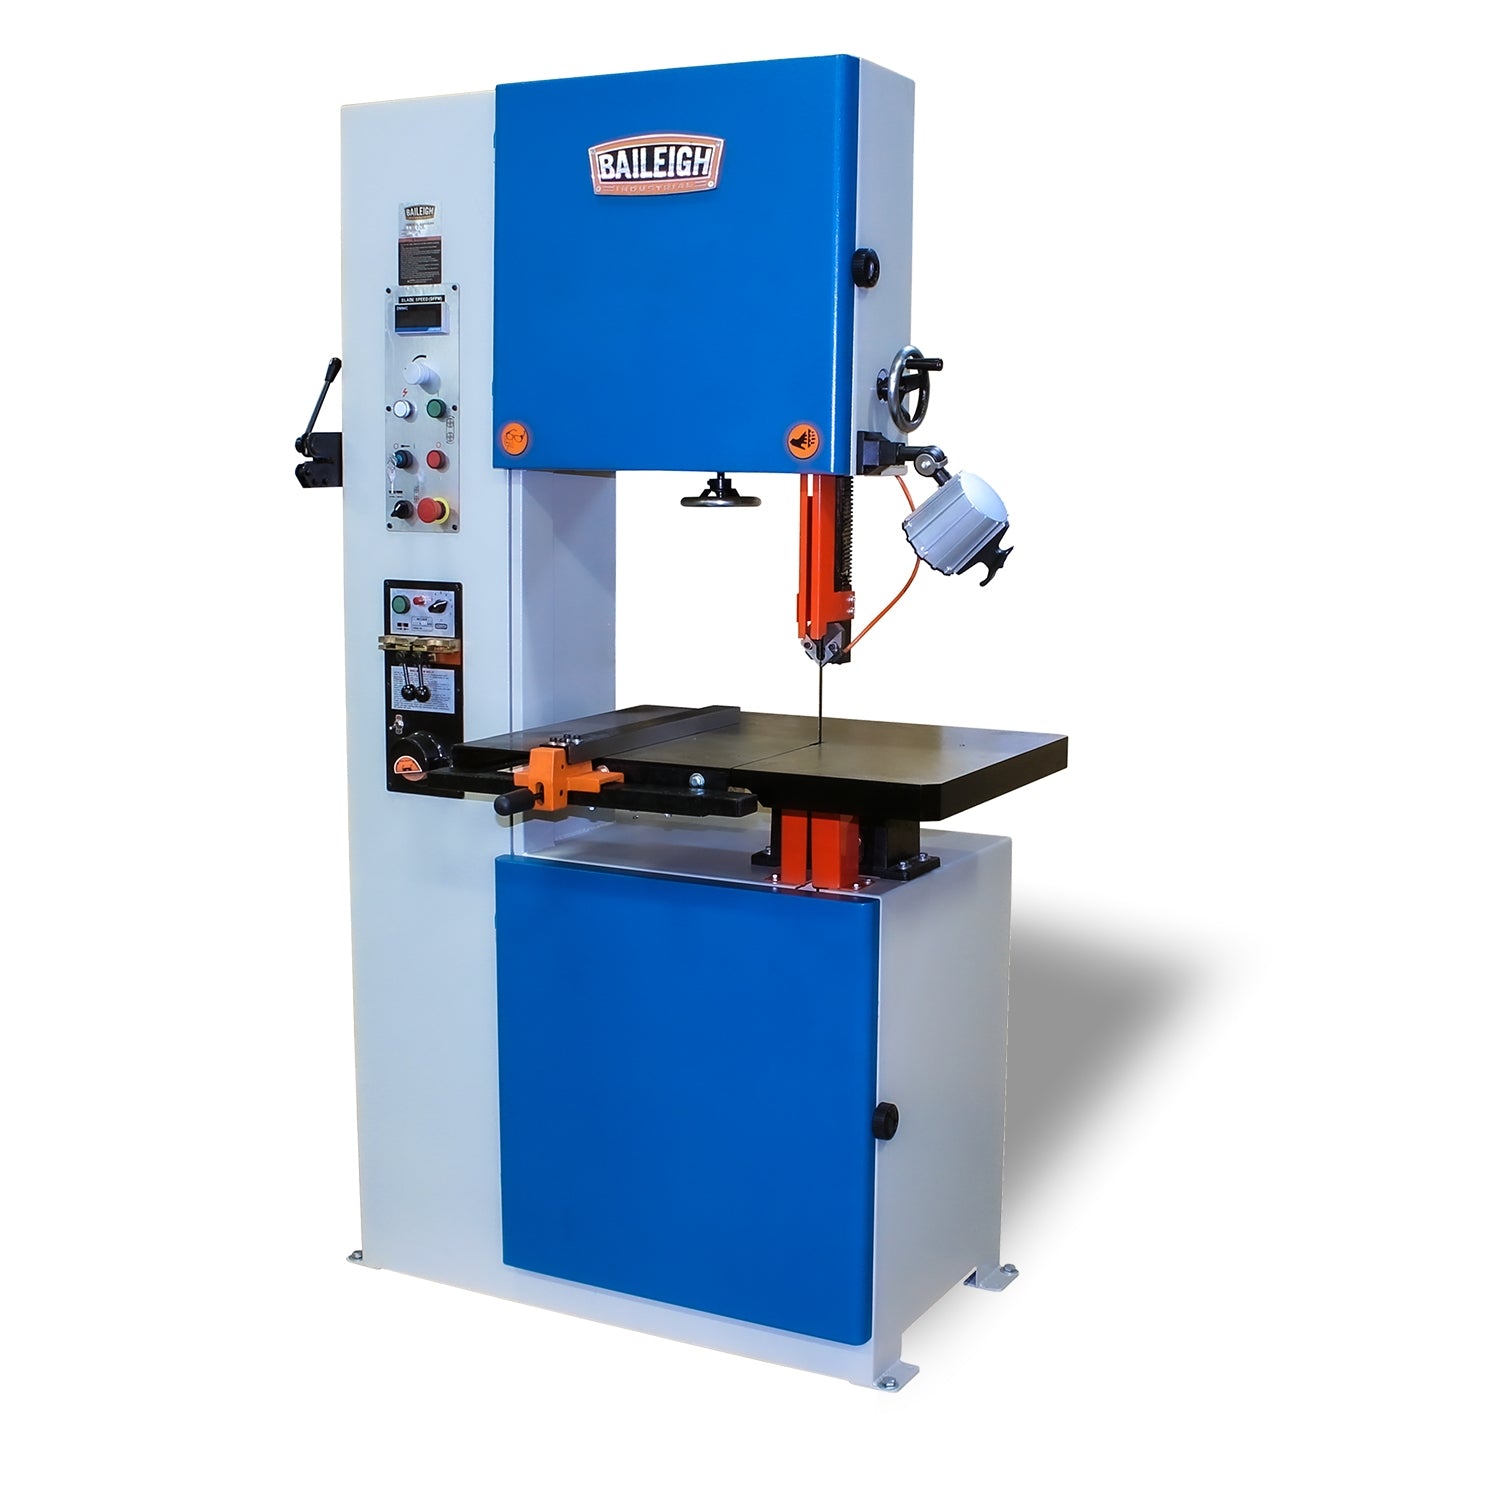 Baileigh BSV-20VS-V2 Variable Speed Vertical Band Saw with 20" Throat Depth, 220V 60Htz Single Phase